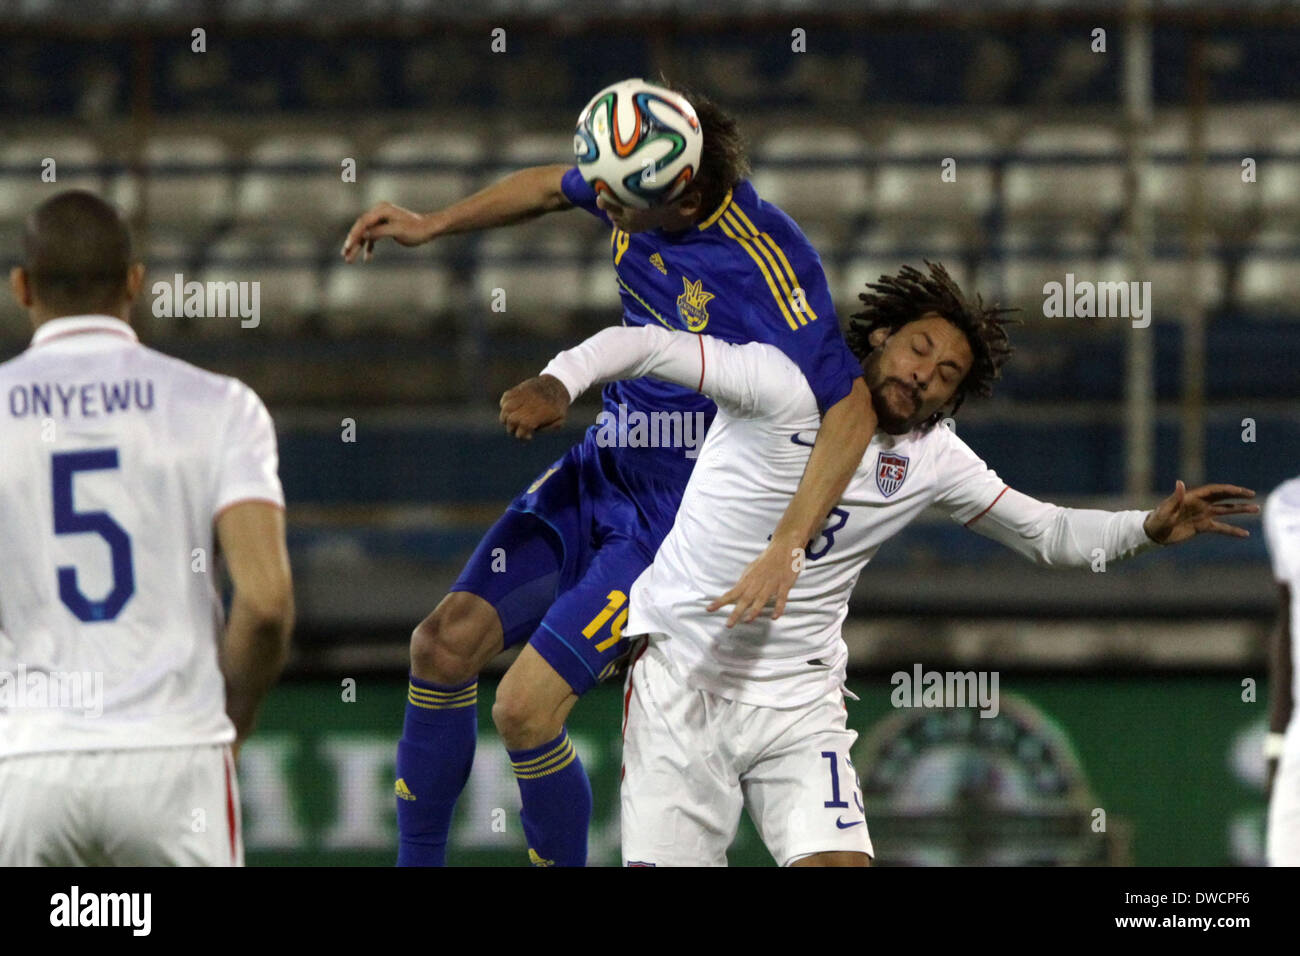 Cyprus, Larnaka- March 05,2014: Ukraine's Denys Garmash   fight  for the ball with USA's jERMAINE jONES during the friendly game  between Ukraine  and USA at the Antonis Papadopoulos  stadium in Larnaka on March  05,2014 Credit:  Yiannis Kourtoglou/Alamy Live News Stock Photo